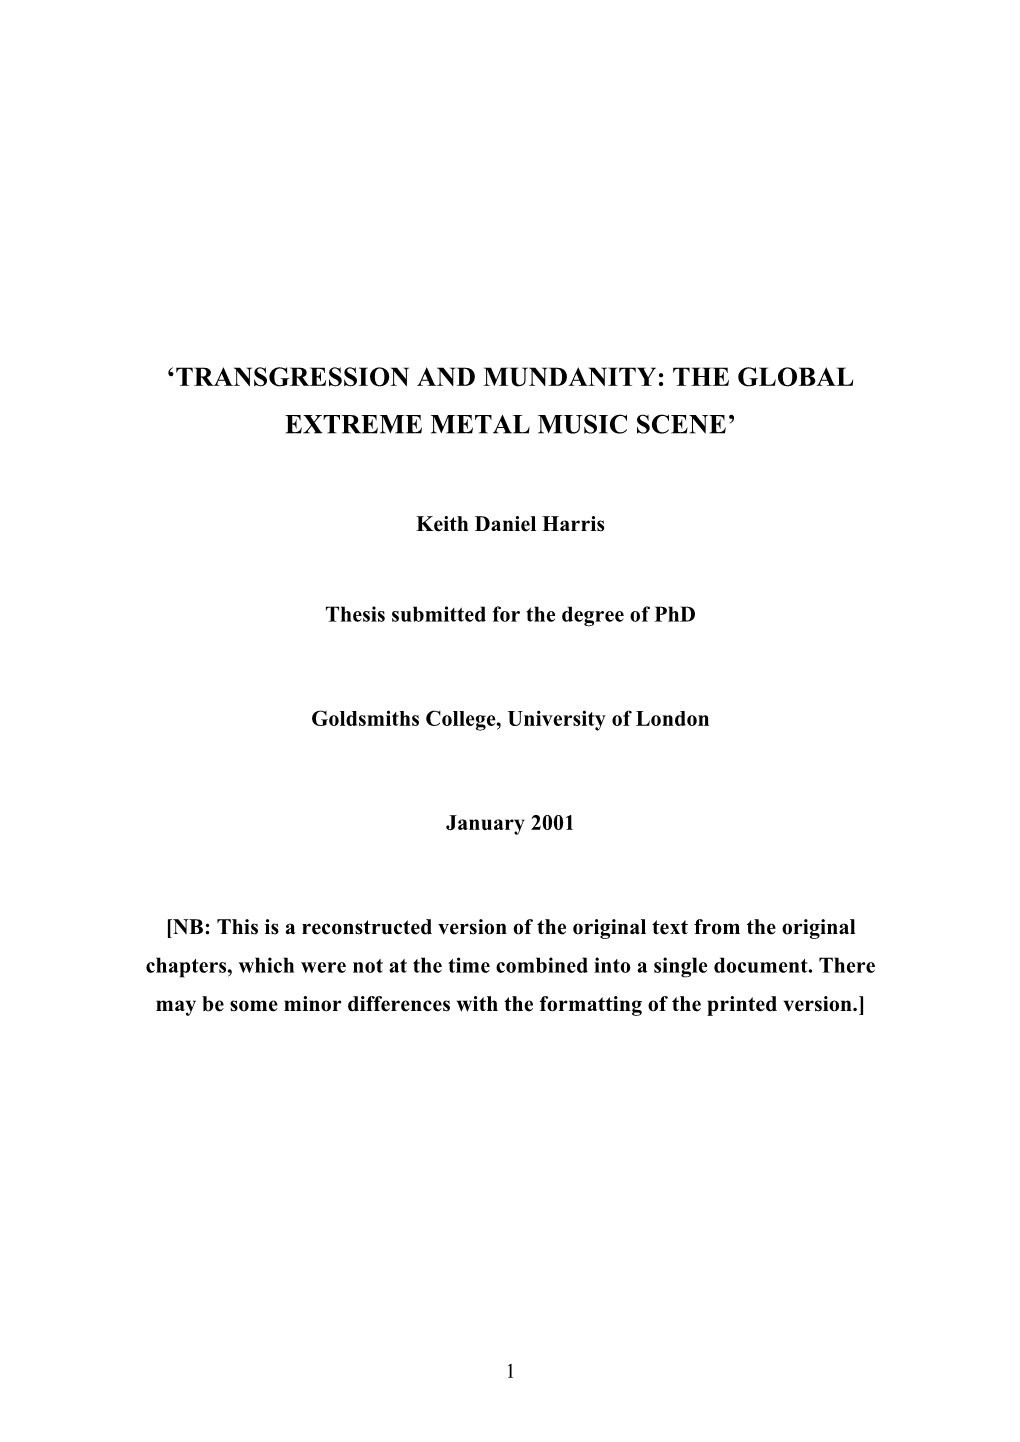 'Transgression and Mundanity: the Global Extreme Metal Music Scene'